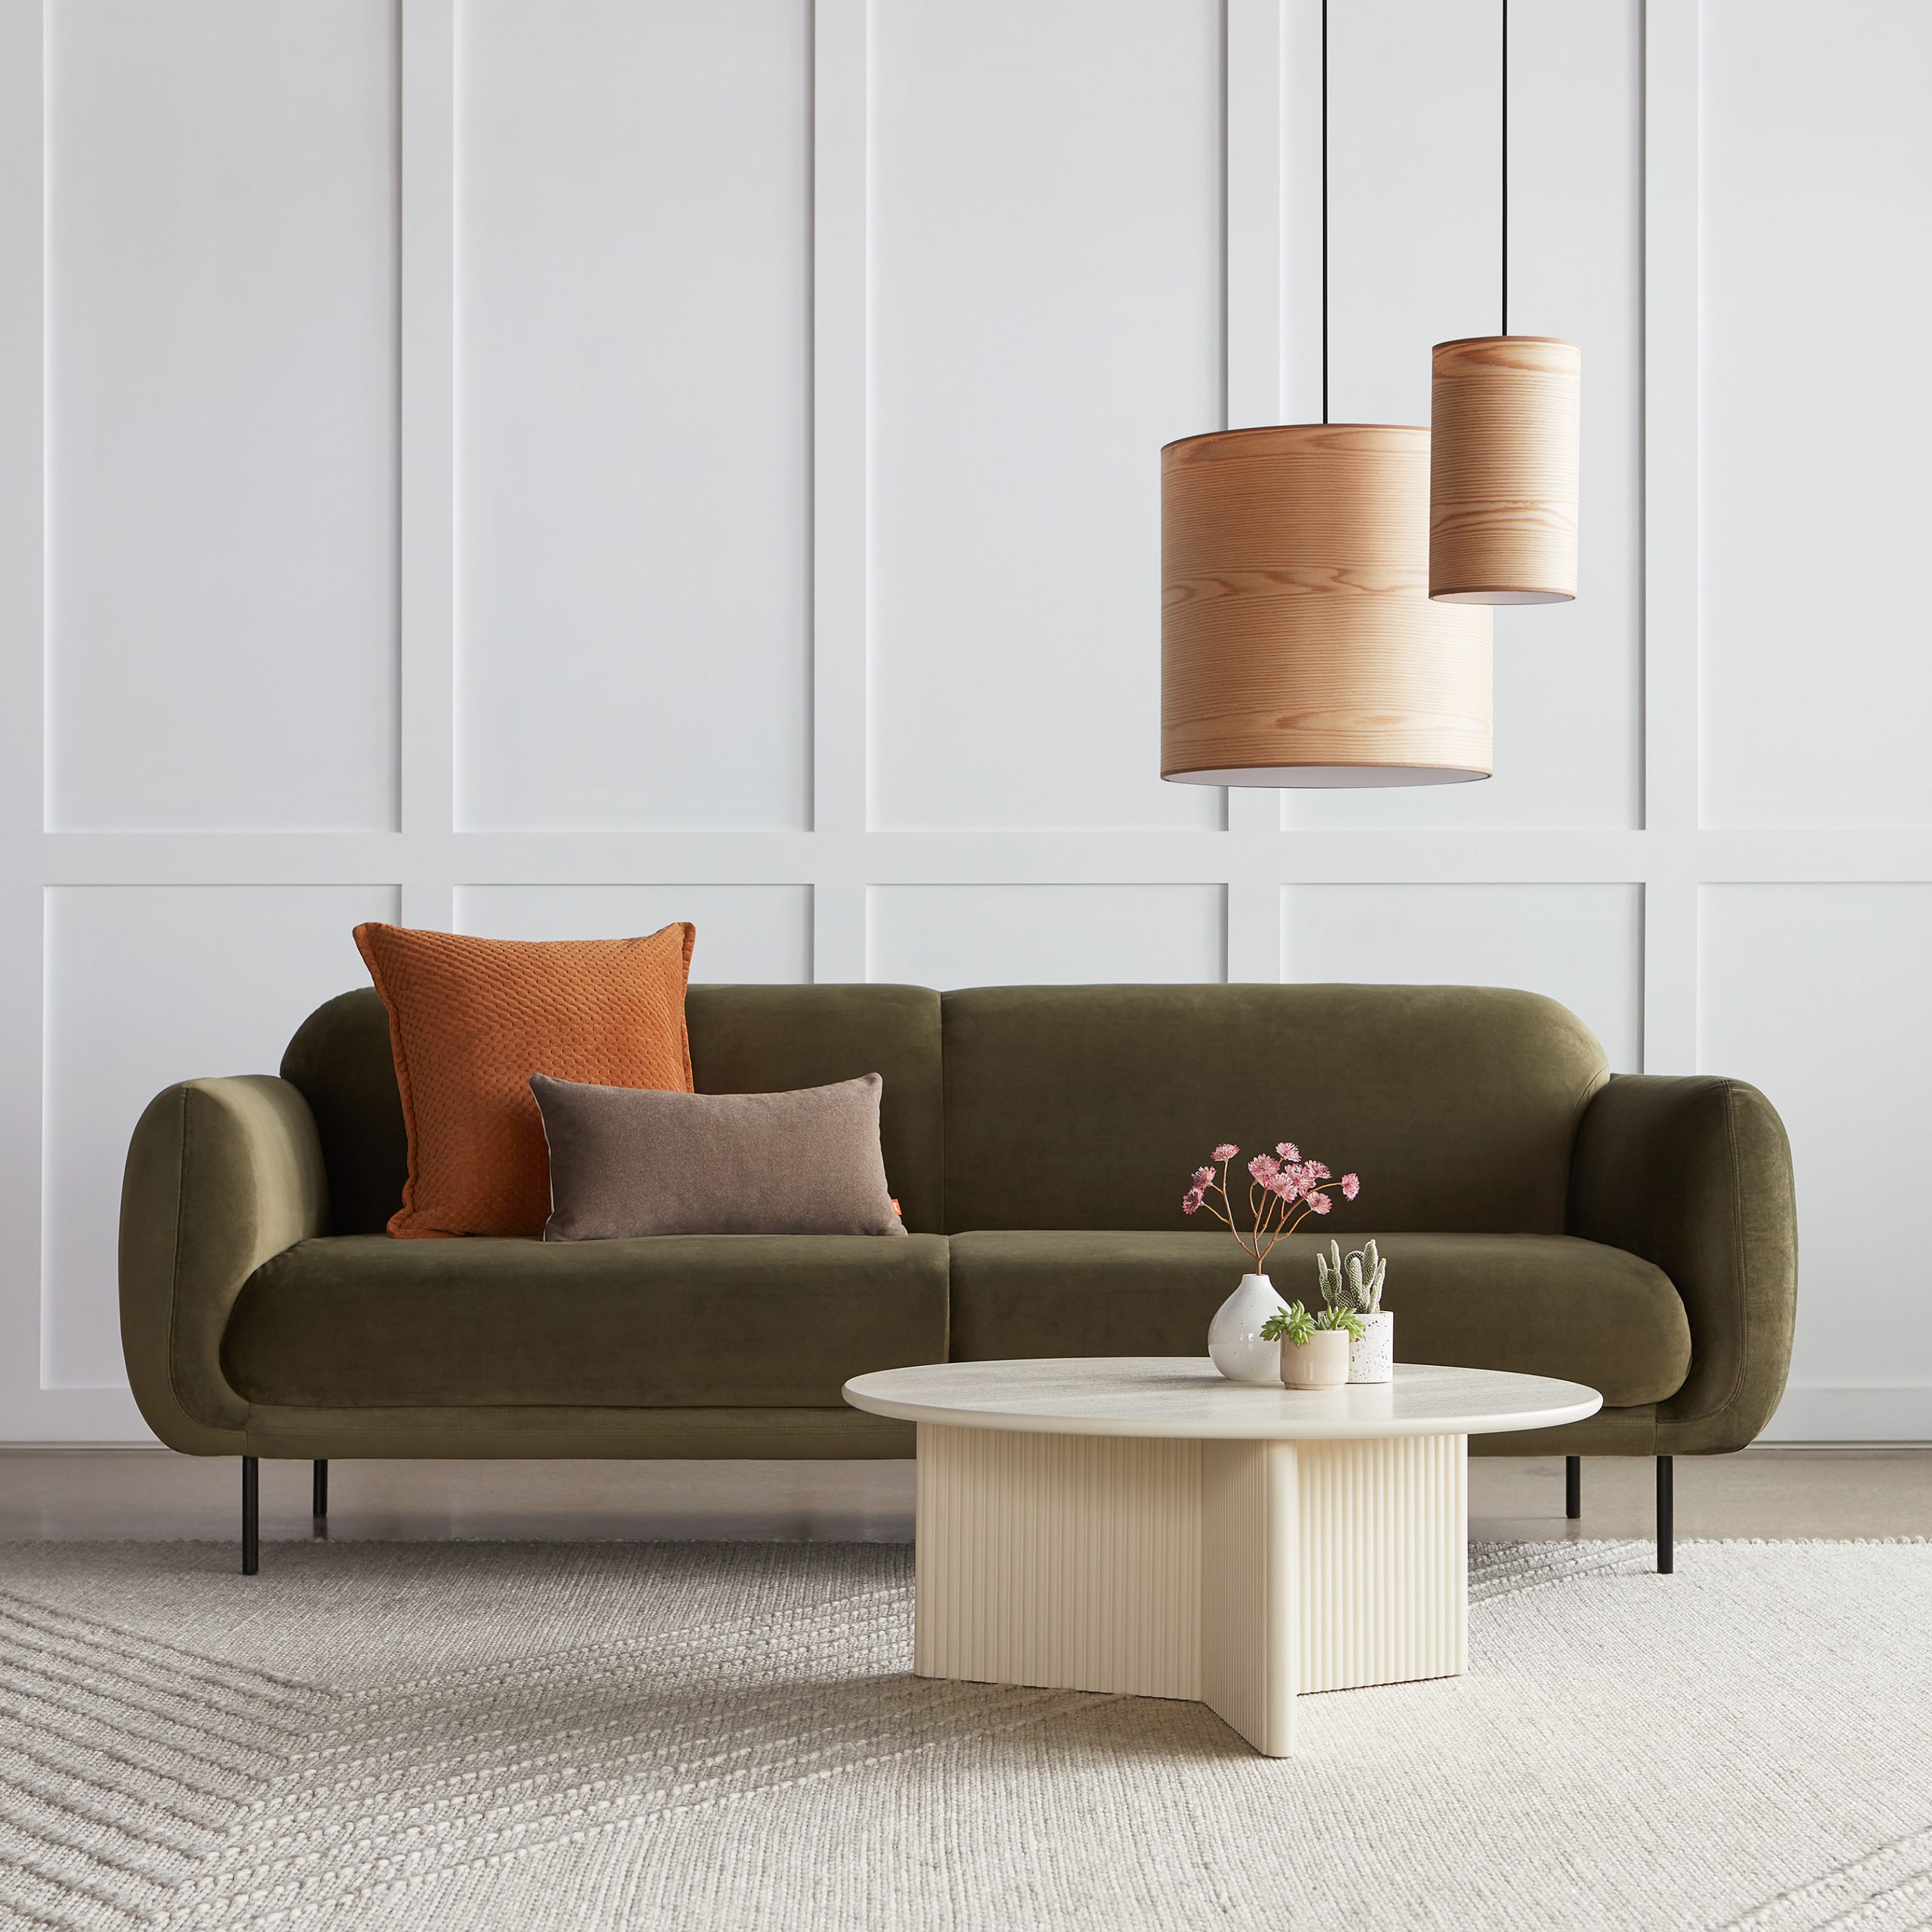 The Nord Sofa in green Casella Grove Fabric with the Odeon Coffee Table in Pearl